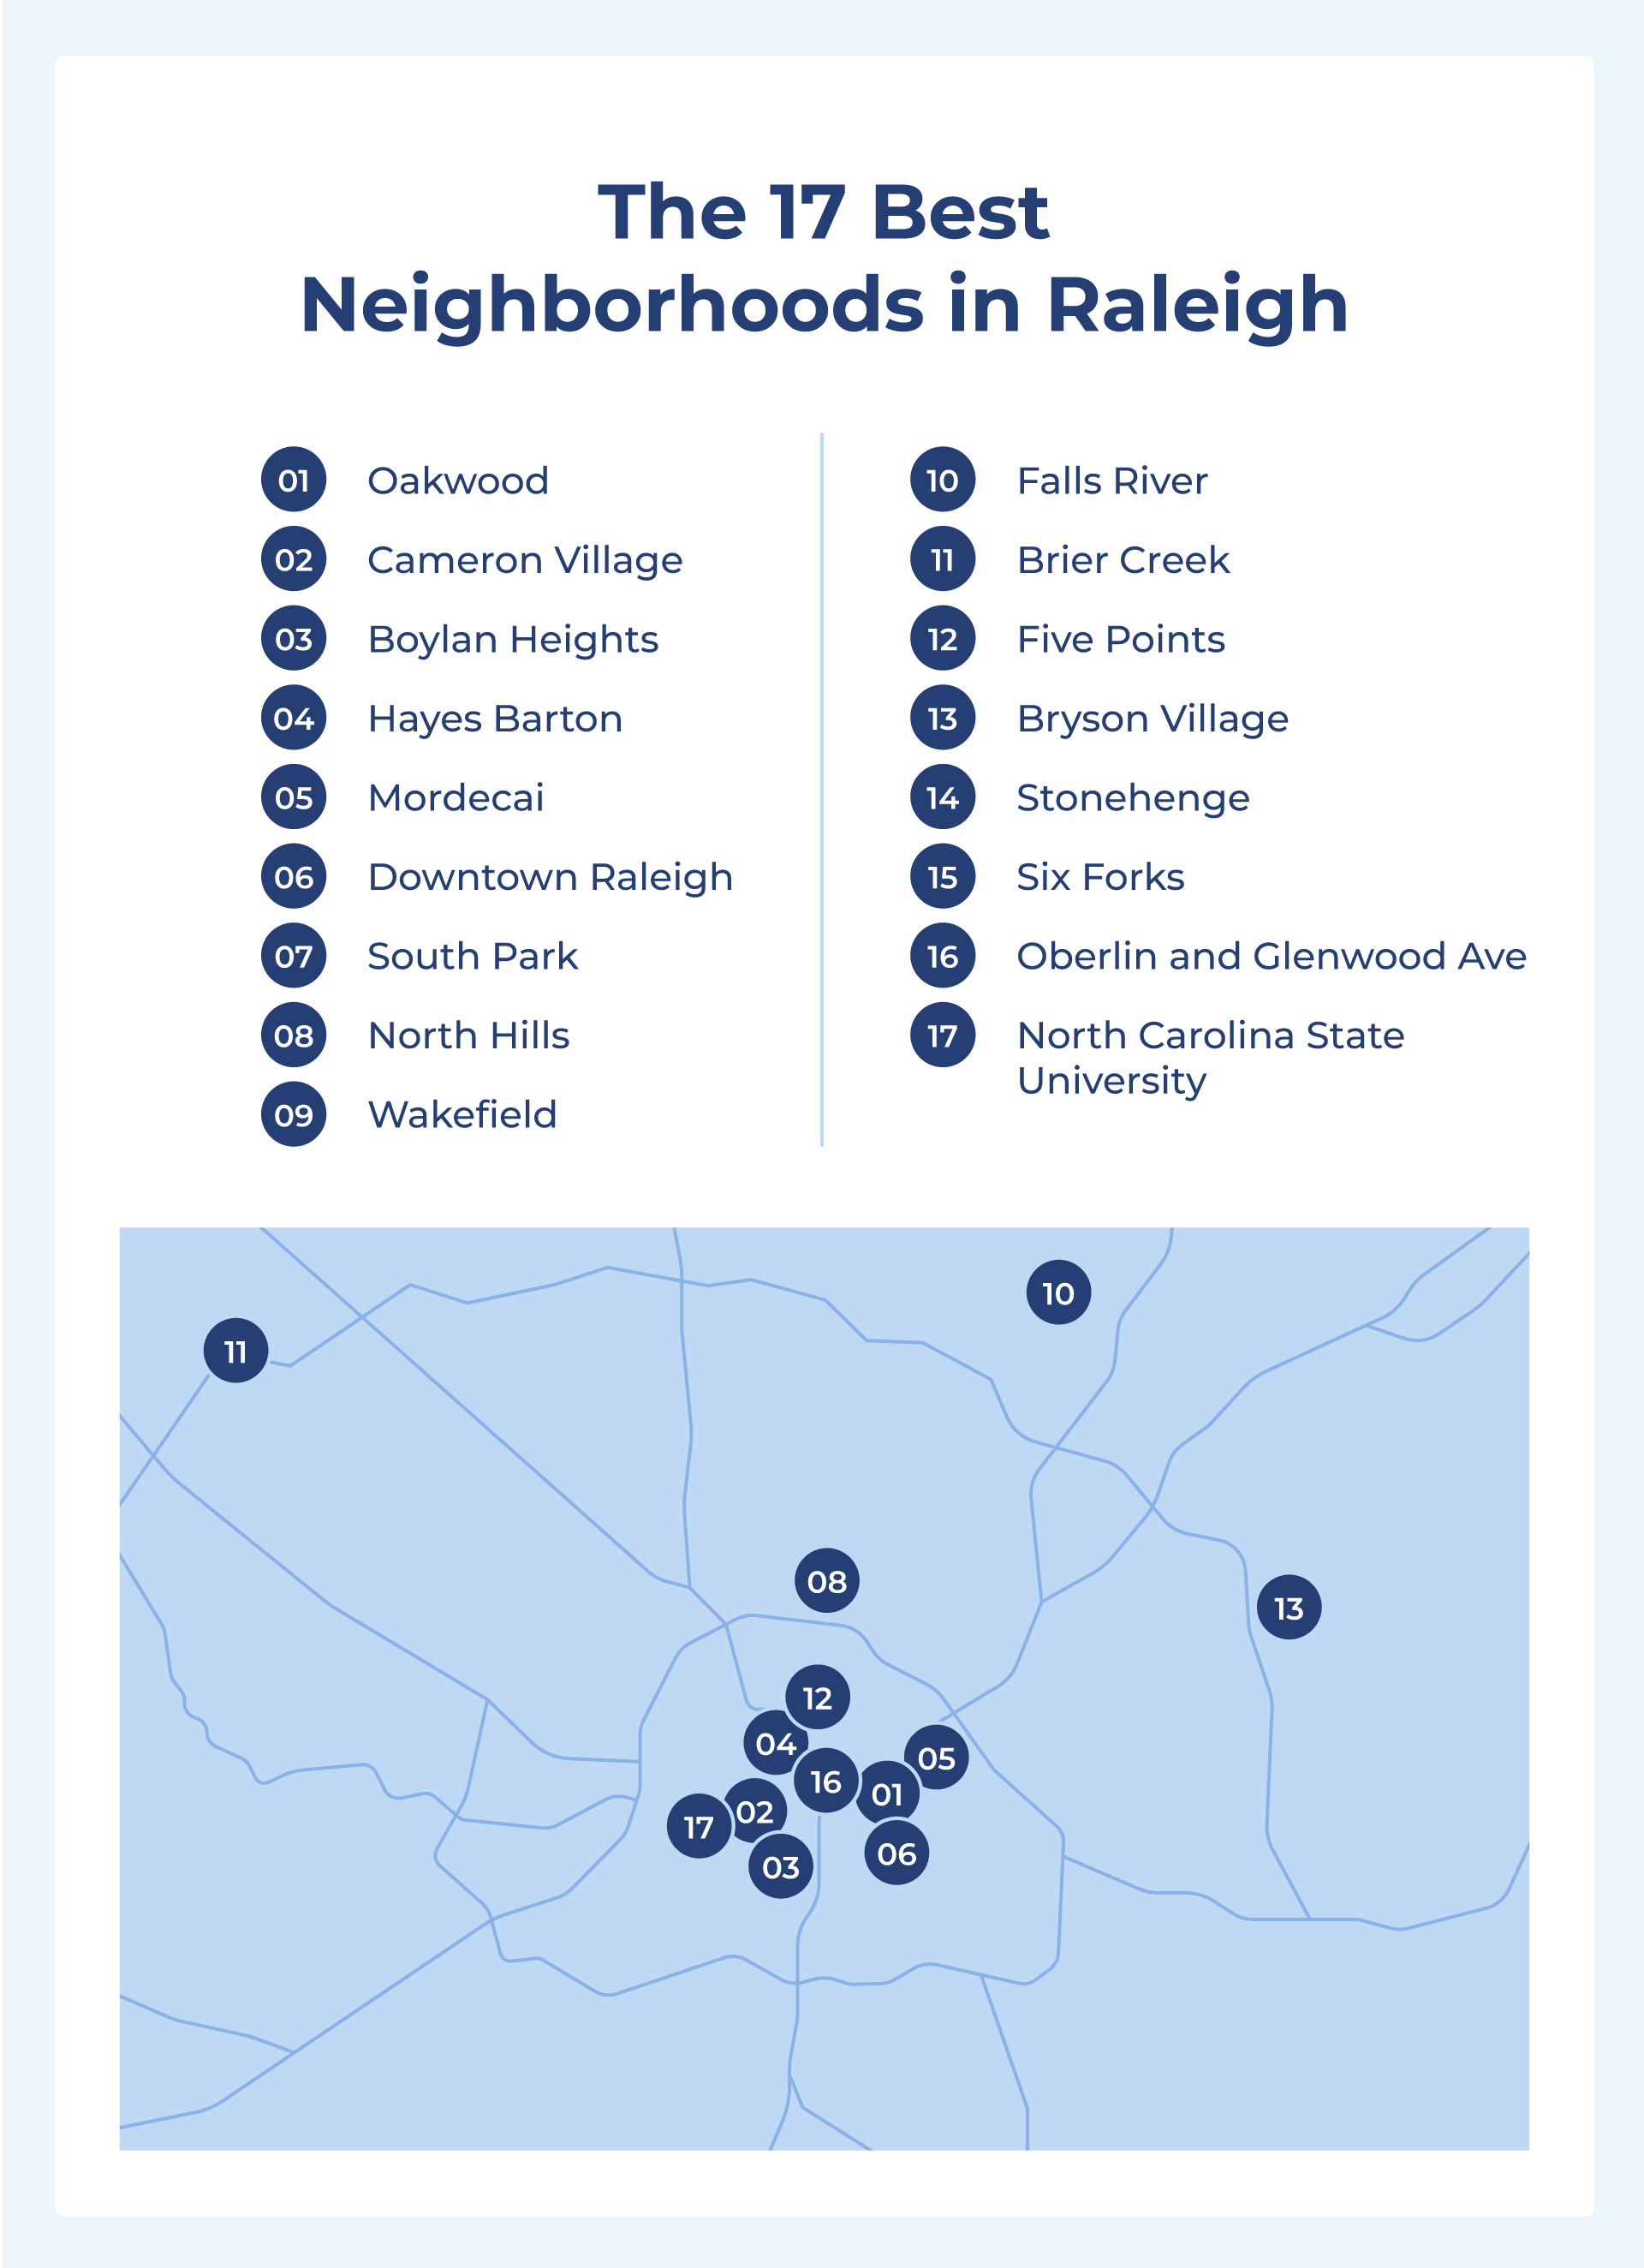 Map shows 17 of the best neighborhoods in Raleigh.